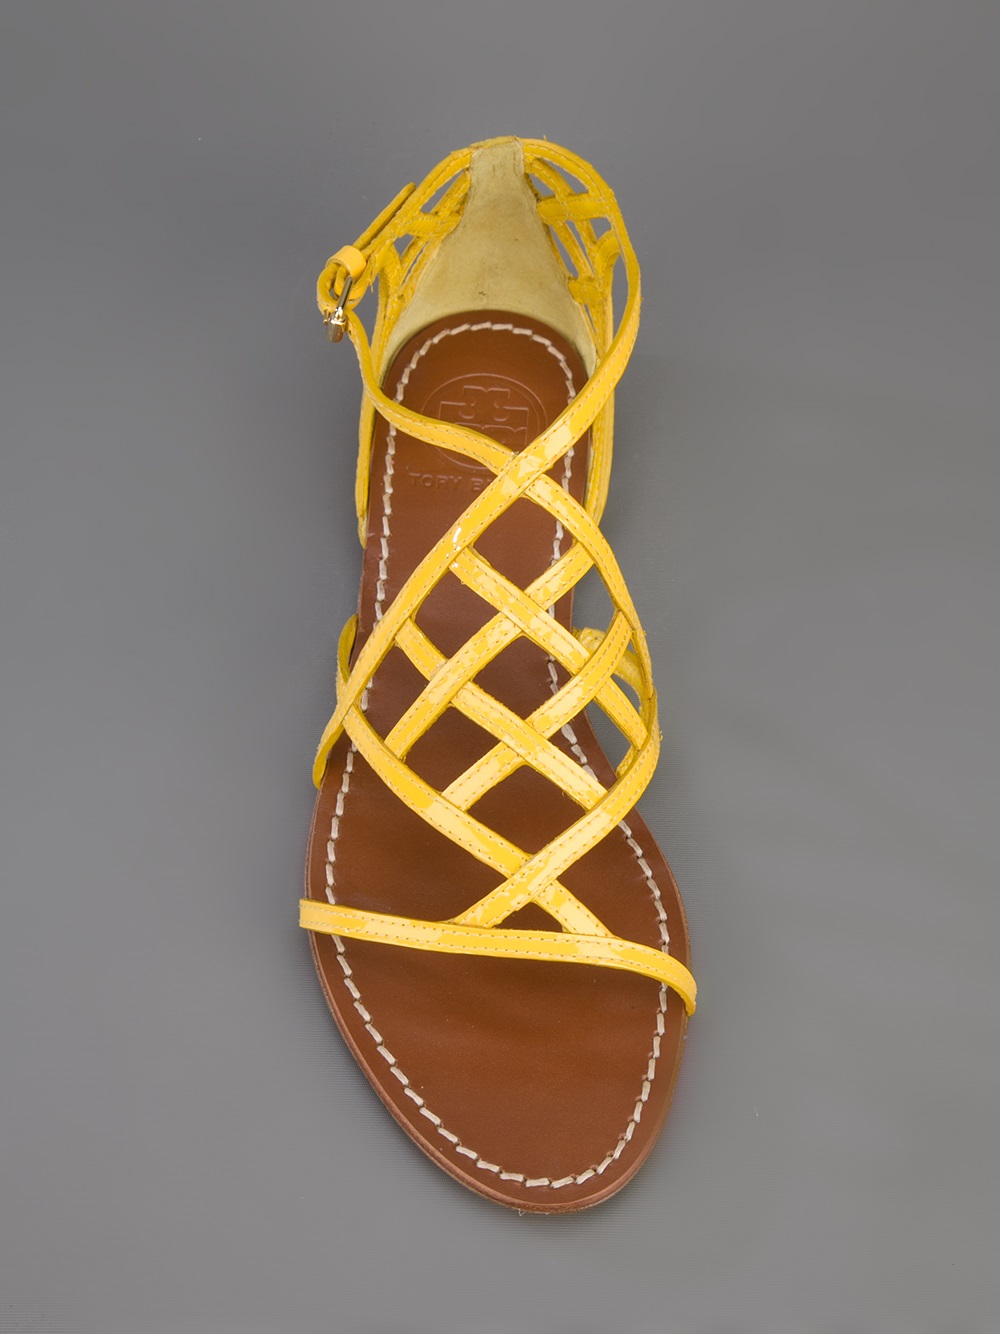 Tory Burch Strappy Flat Sandal in Yellow - Lyst